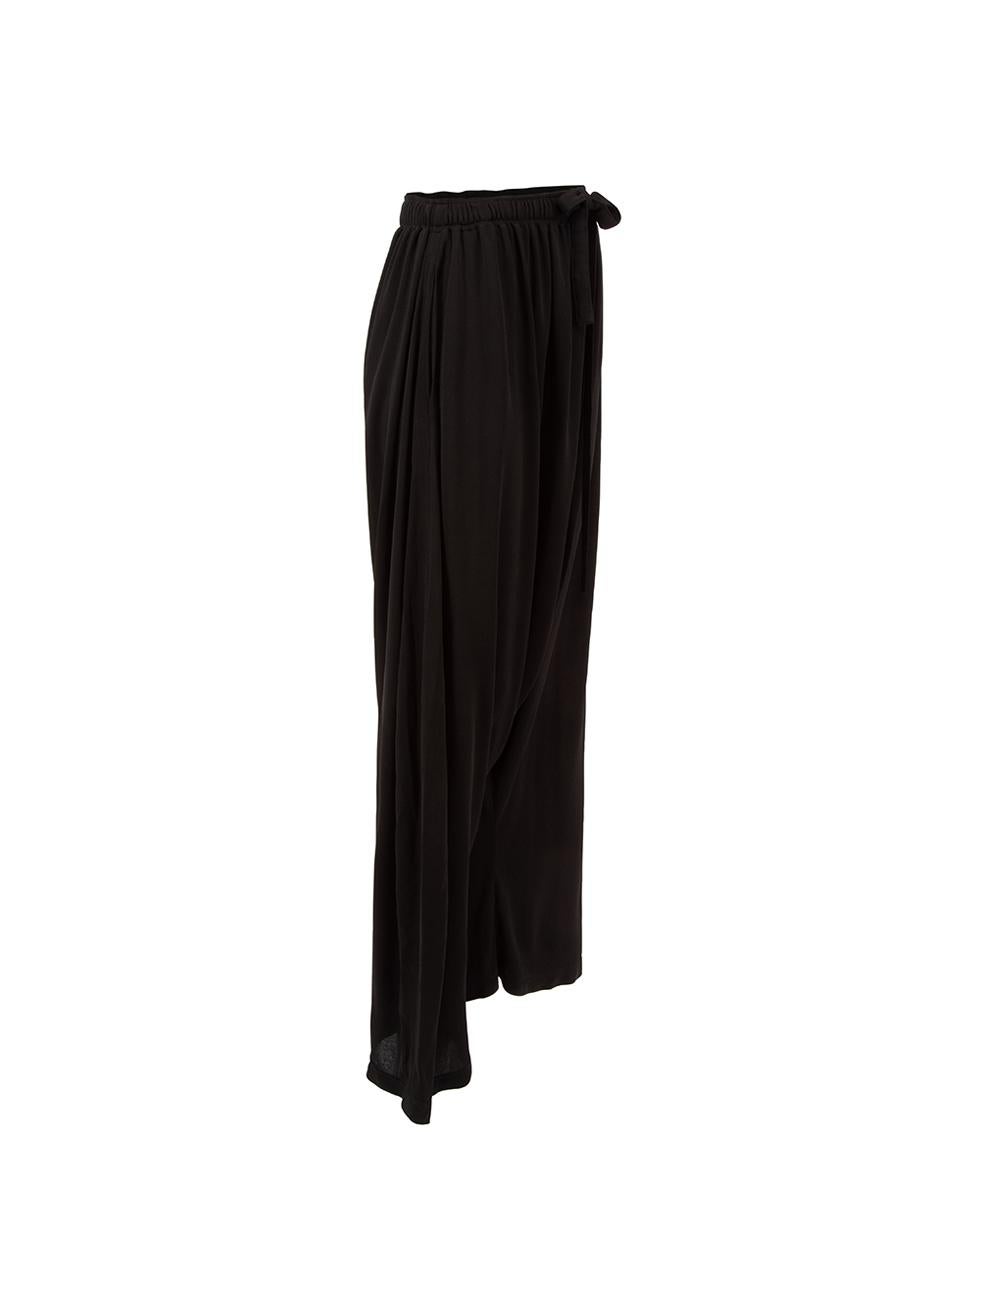 CONDITION is Very good. Hardly any visible wear to trousers is evident on this used Loewe designer resale item. 
 
 Details
  Black
 Viscose
 Sagging trousers
 High rise
 Elasticated waistband with drawstring
 Front side pockets
 
 
 Made in Poland
